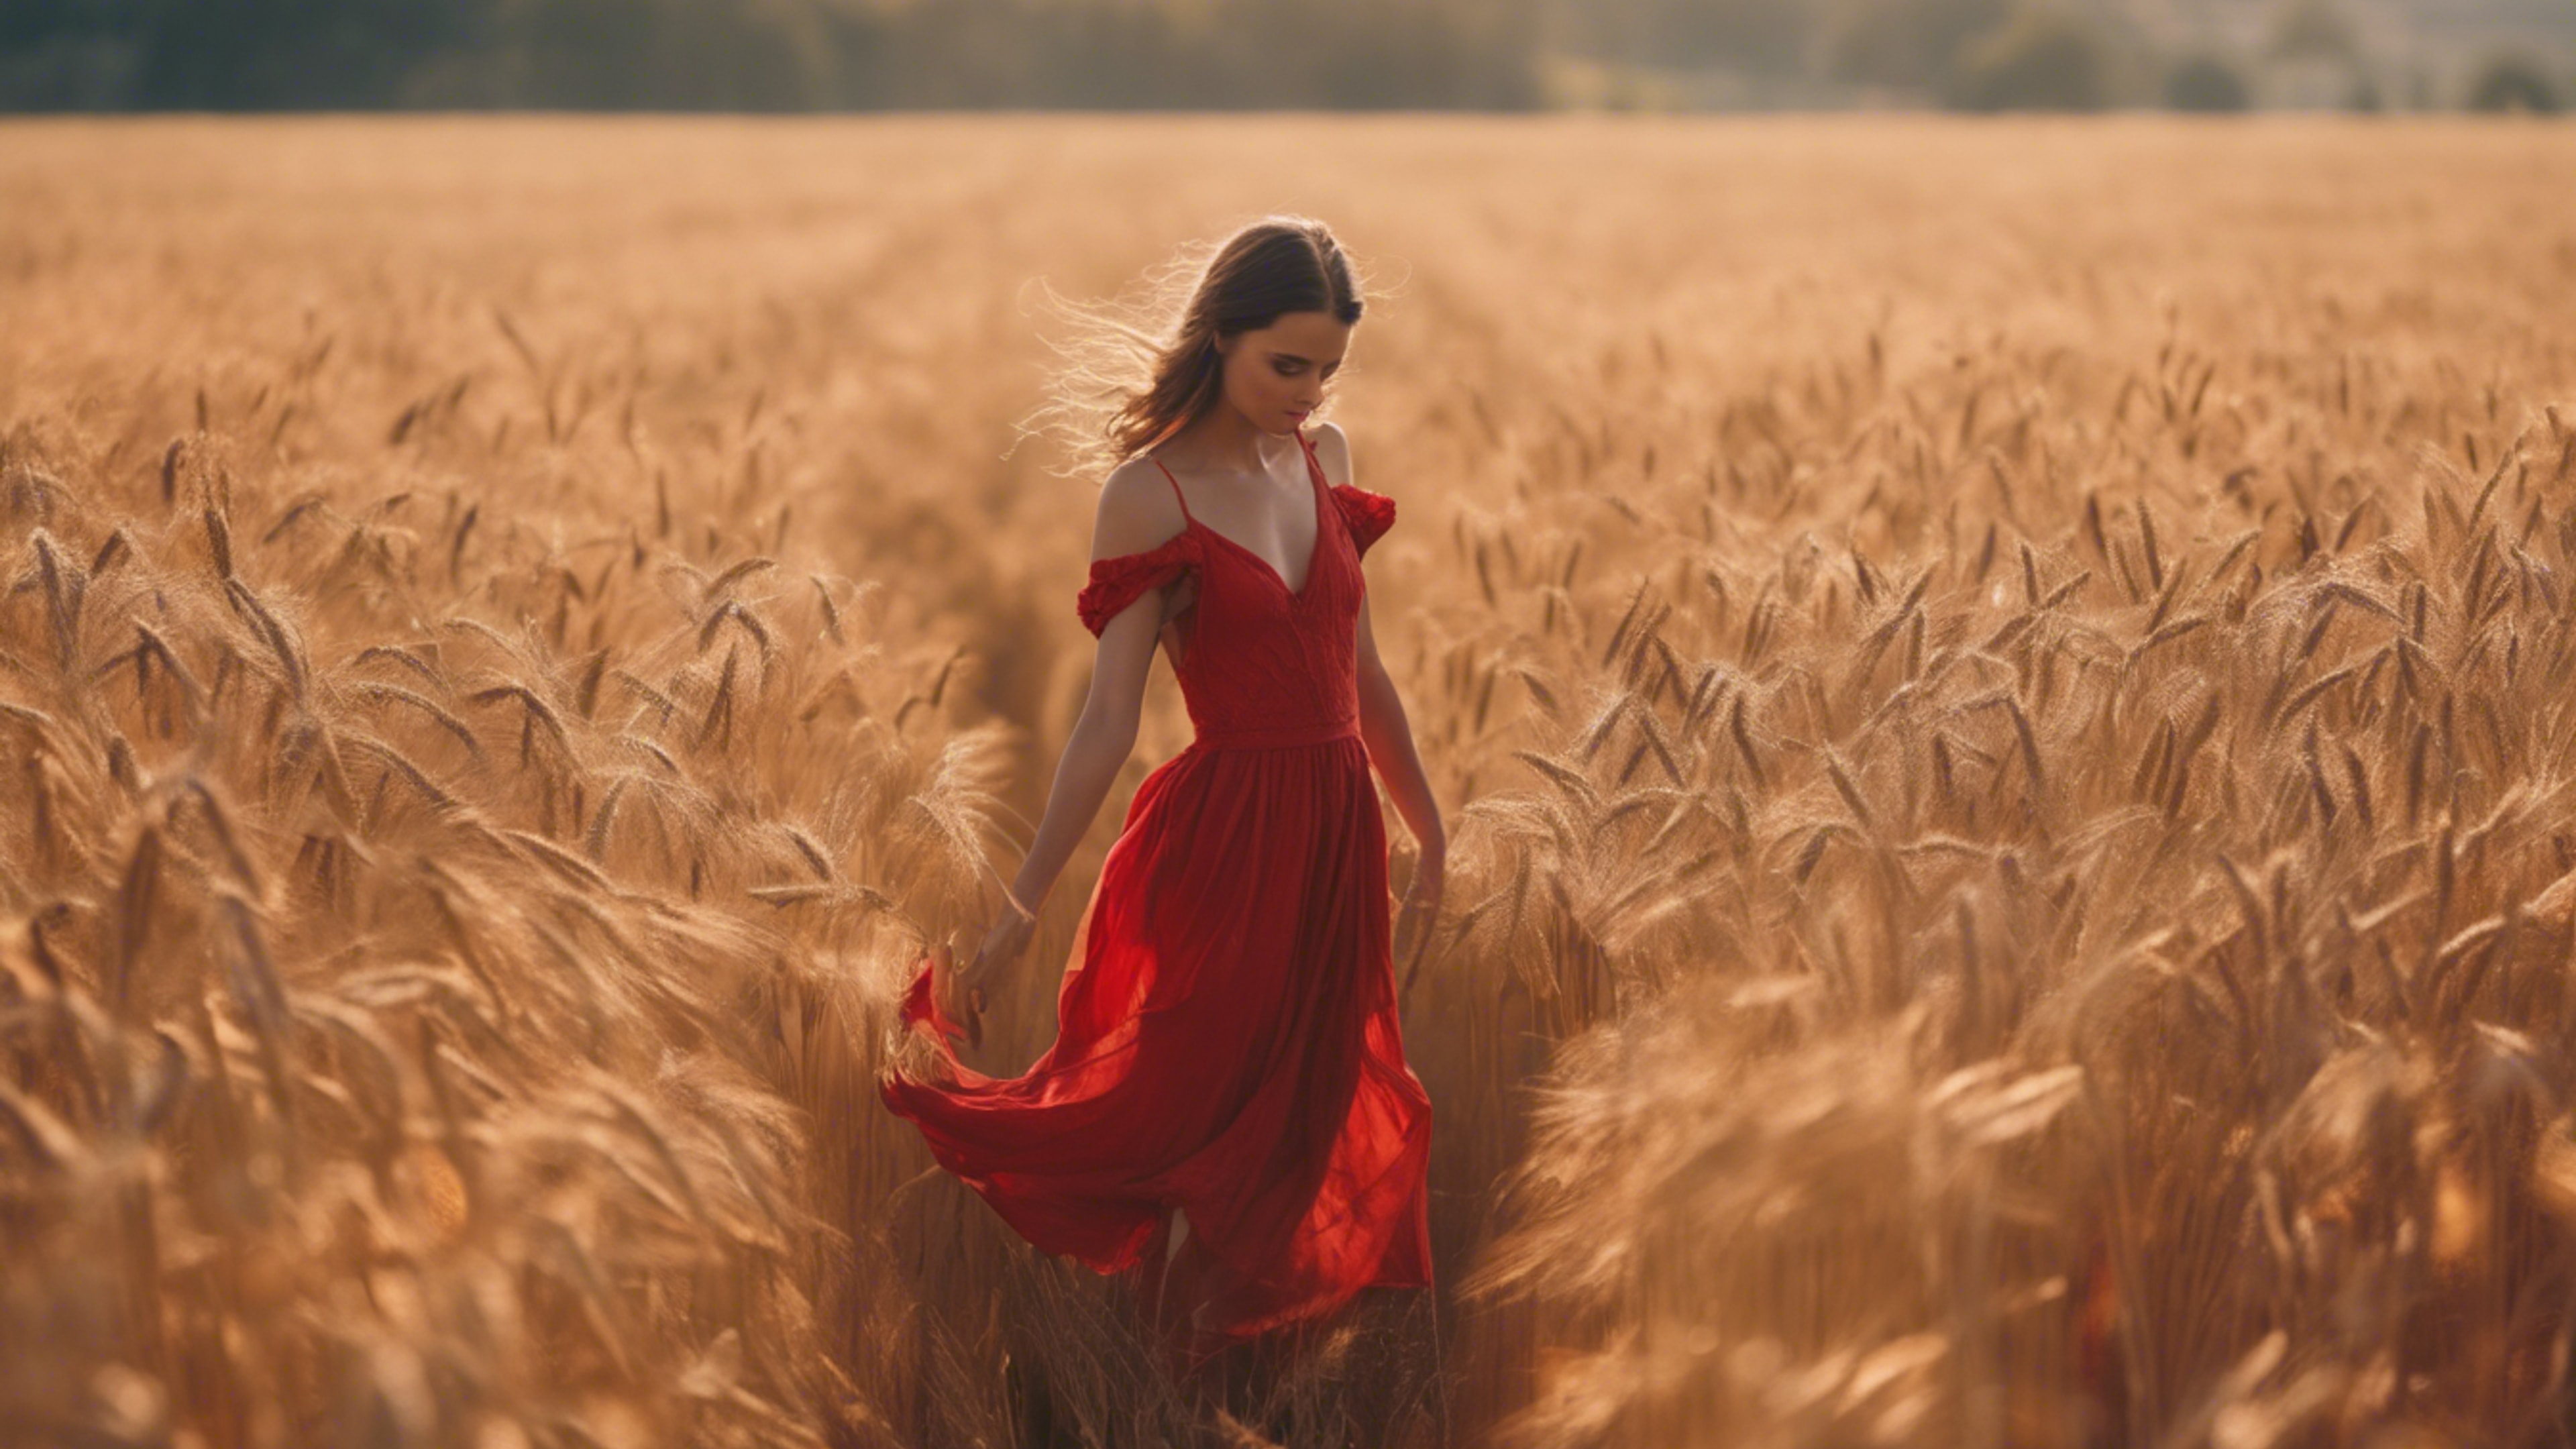 A young girl in a fiery red dress dancing in a golden wheat field. วอลล์เปเปอร์[3d2bbc59672c41dea075]